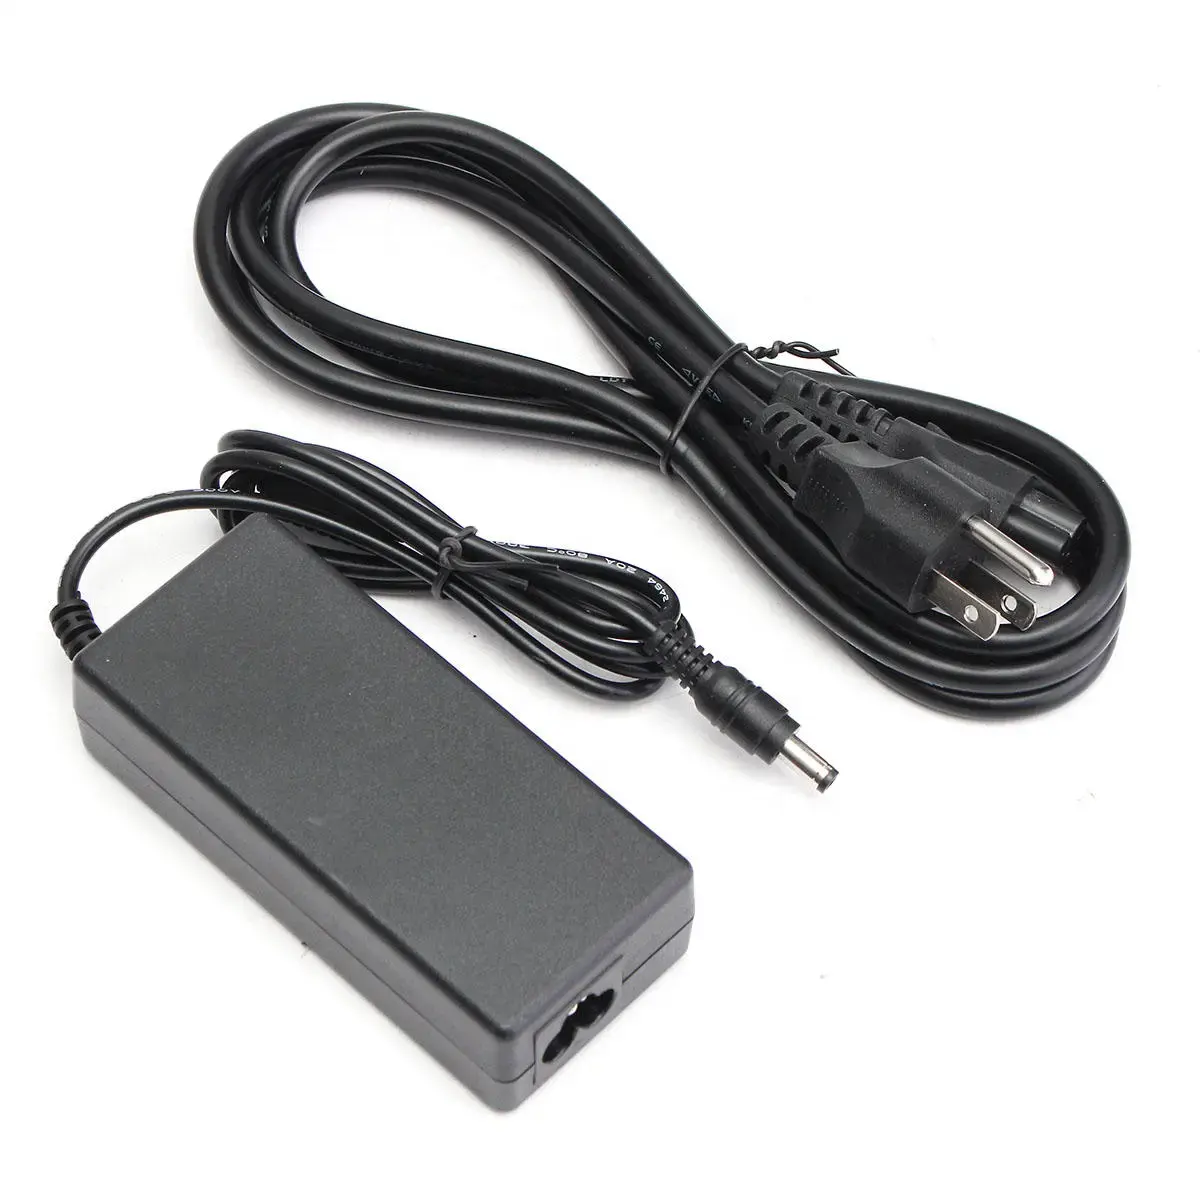 AC To DC 19V 3.42A Power Adapter Universal Power Supply Charger US/EU Plug